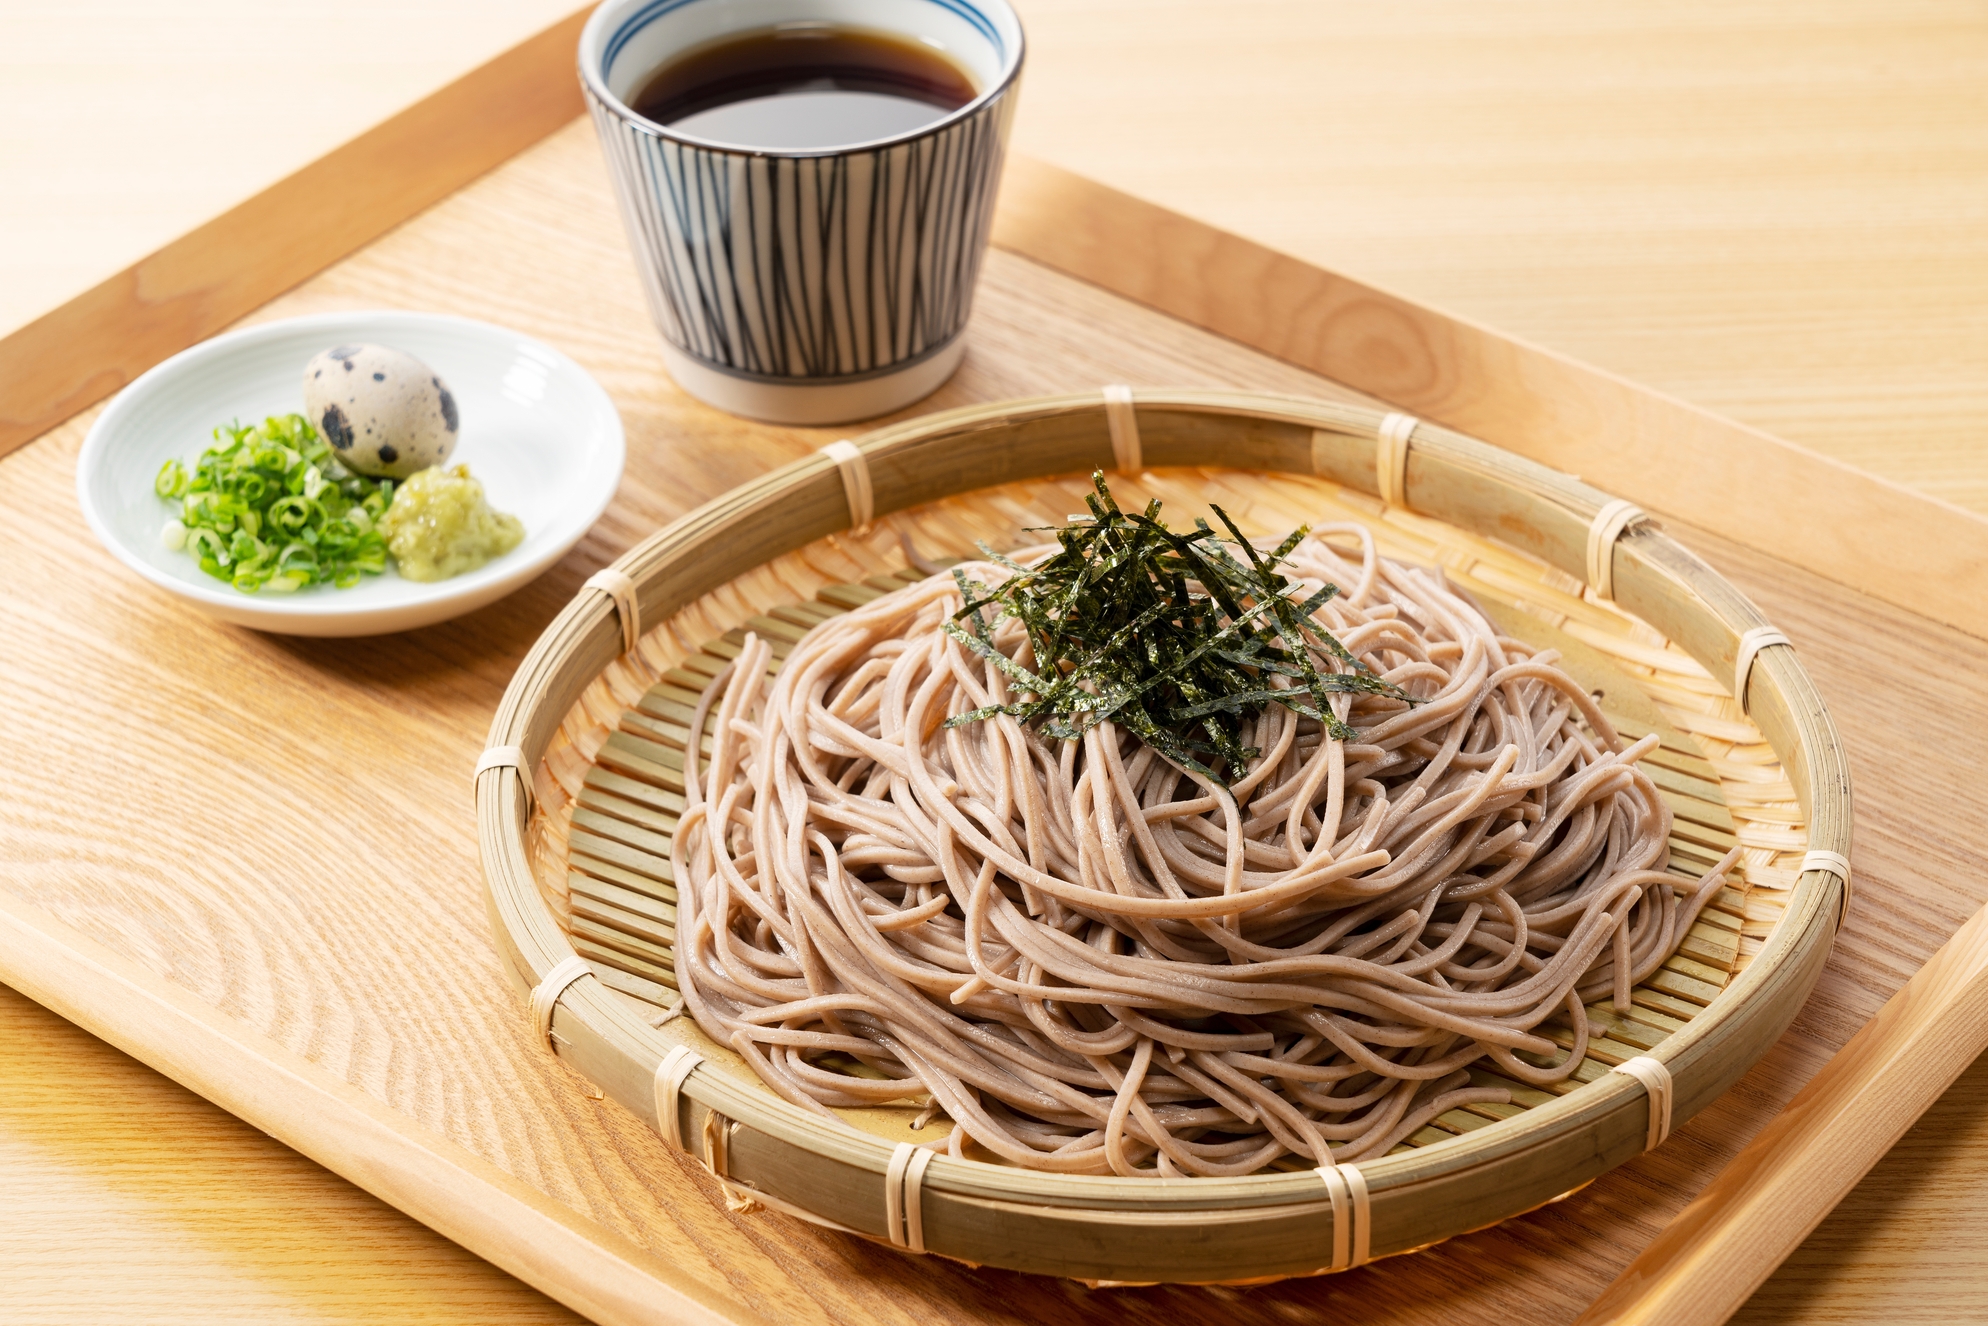 Zaru-soba and condiments on a wooden table. Zaru soba is a traditional Japanese food.